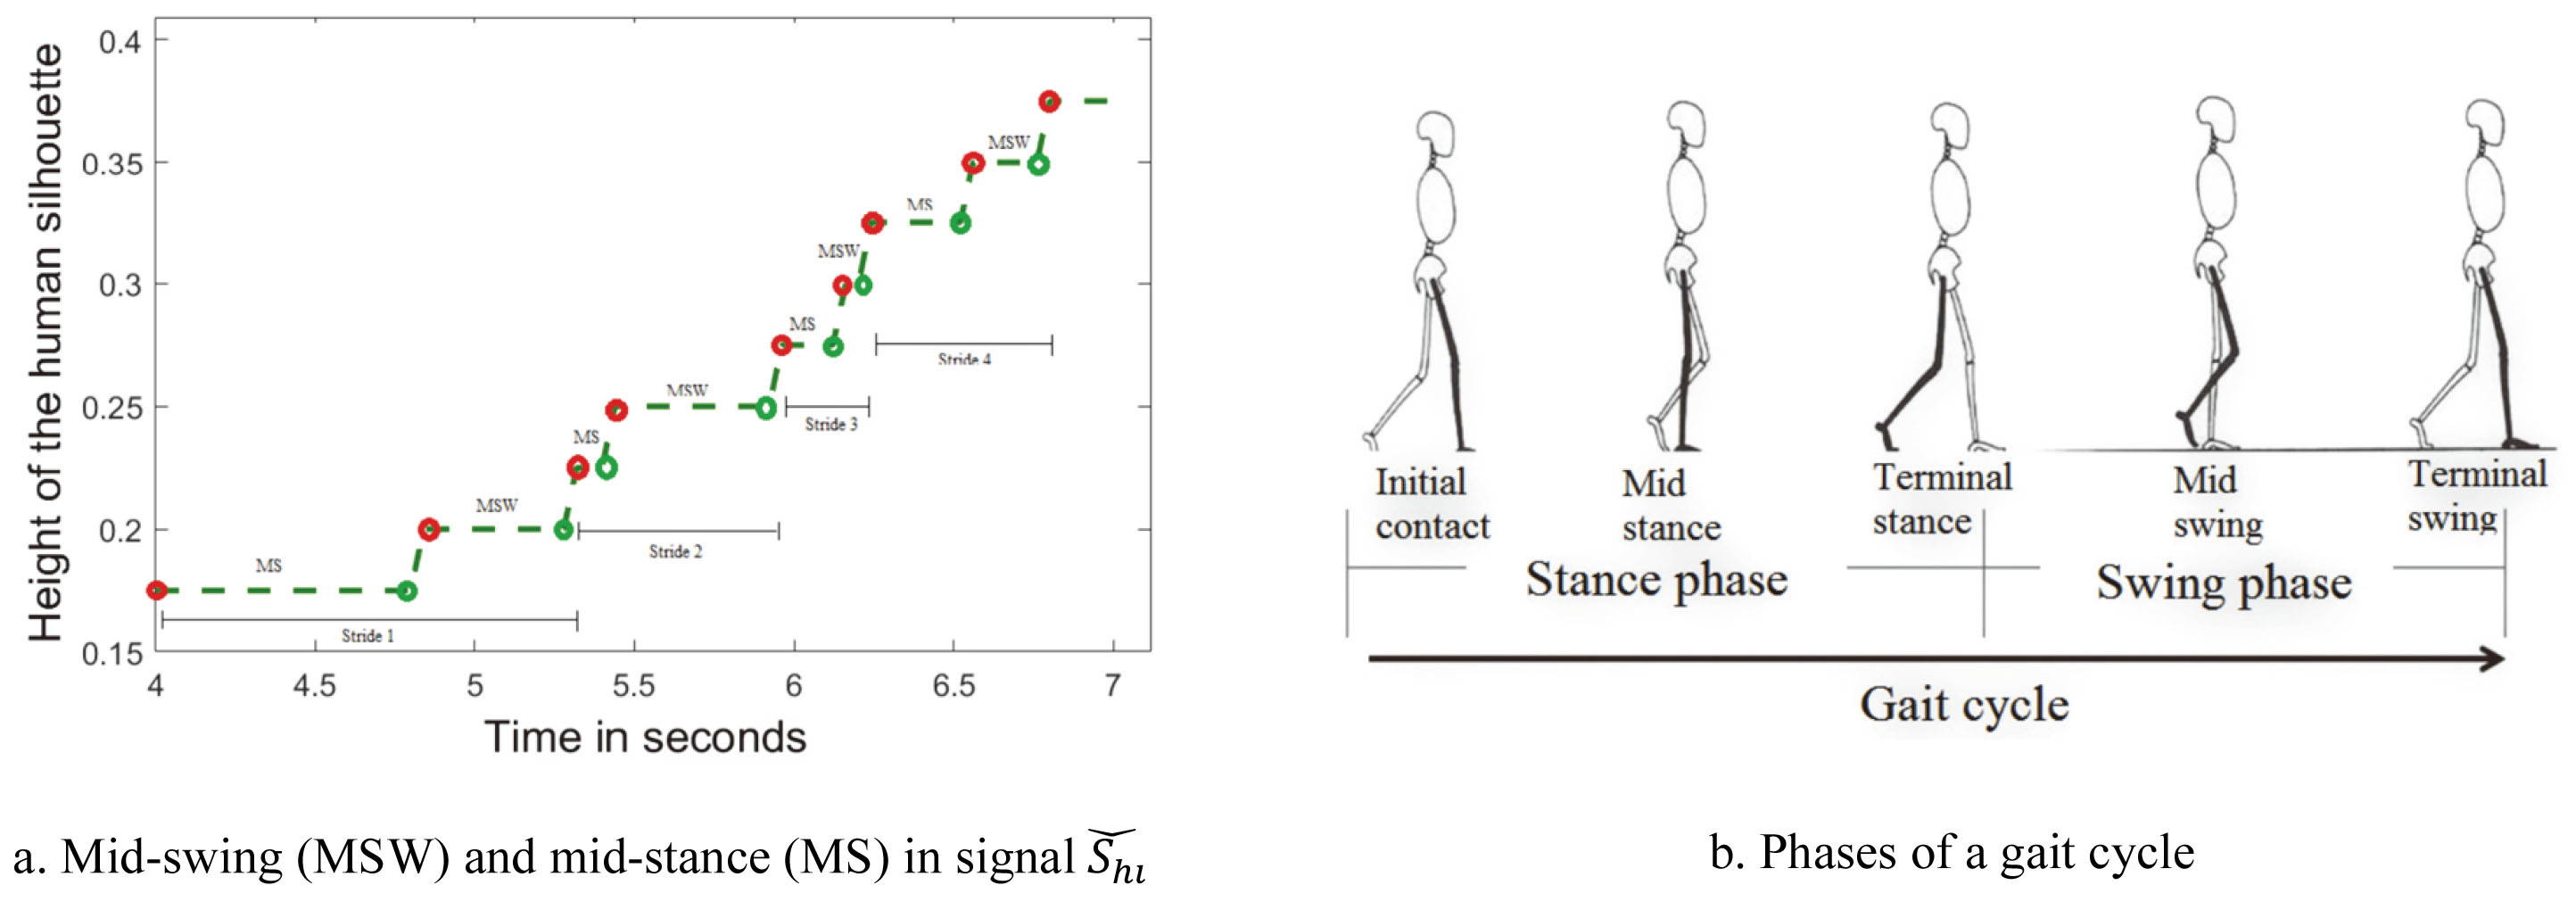 Representation of gait events in the quantized height signal.